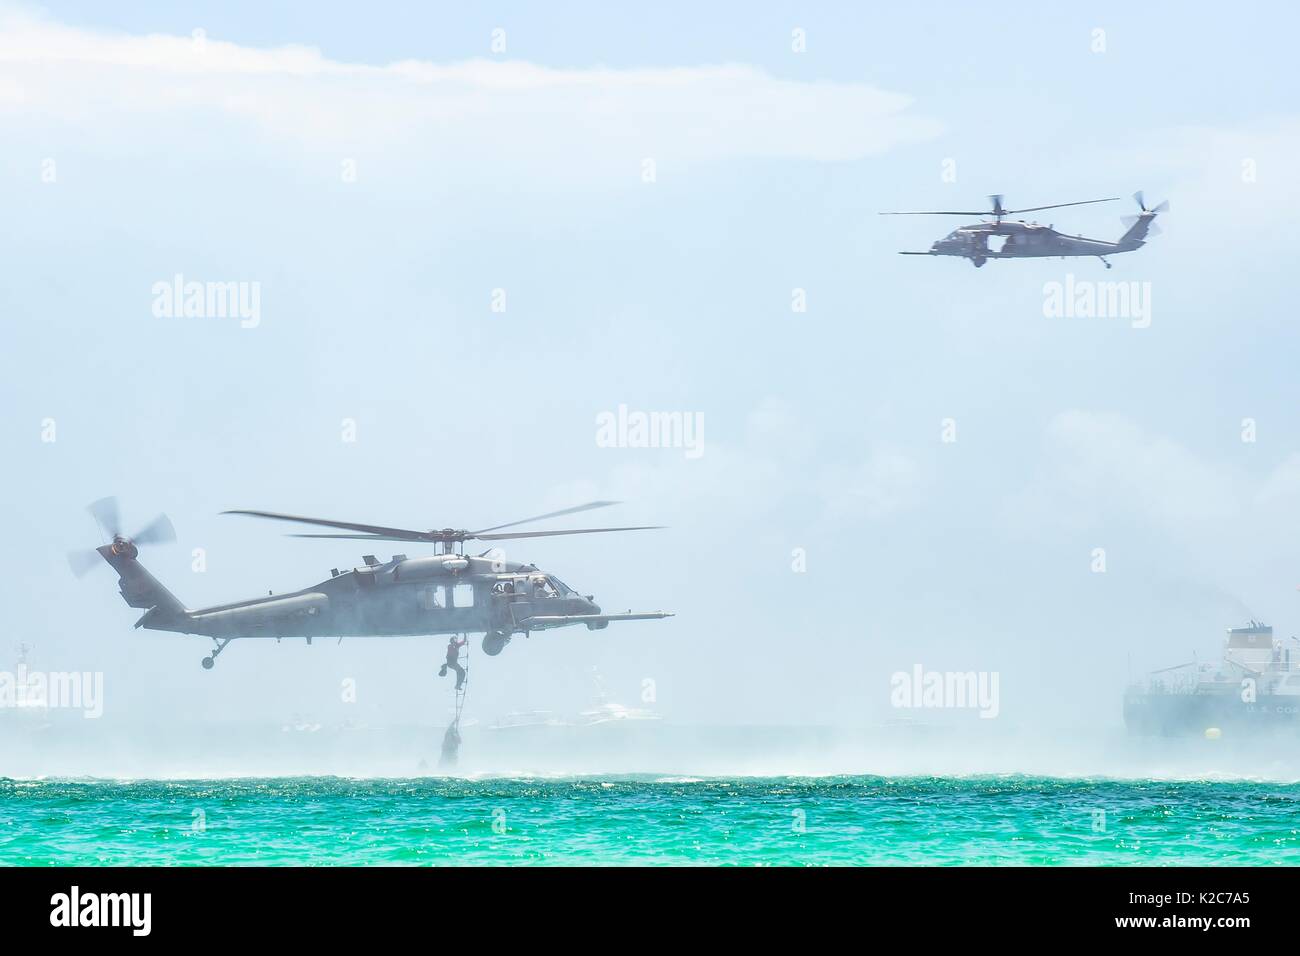 U.S. soldiers climb out of the water and into a U.S. Air Force HH-60G Pave Hawk helicopter during the National Salute to Americas Heroes Air and Sea Show May 27, 2017 in Miami Beach, Florida. Stock Photo